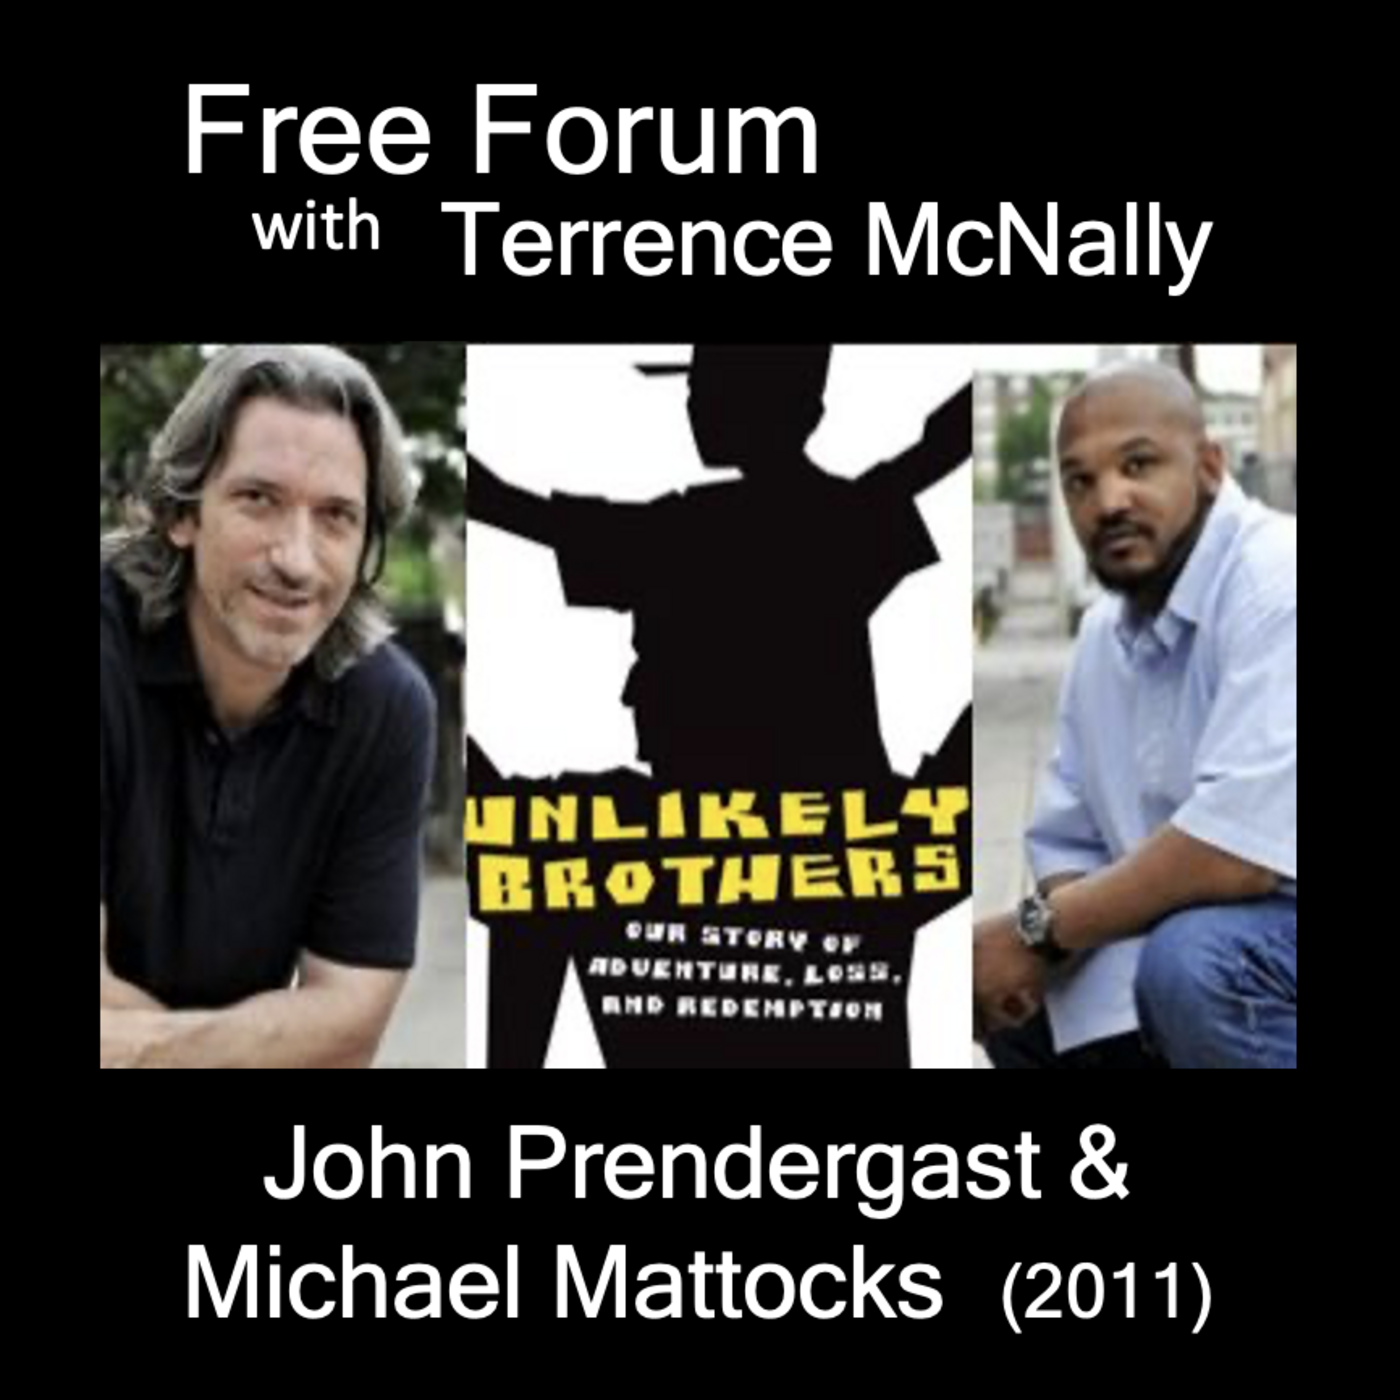 Episode 625: UNLIKELY BROTHERS (2011)-John Prendergast & Michael Mattocks talk about their 25 year Big Brother-Little Brother relationship